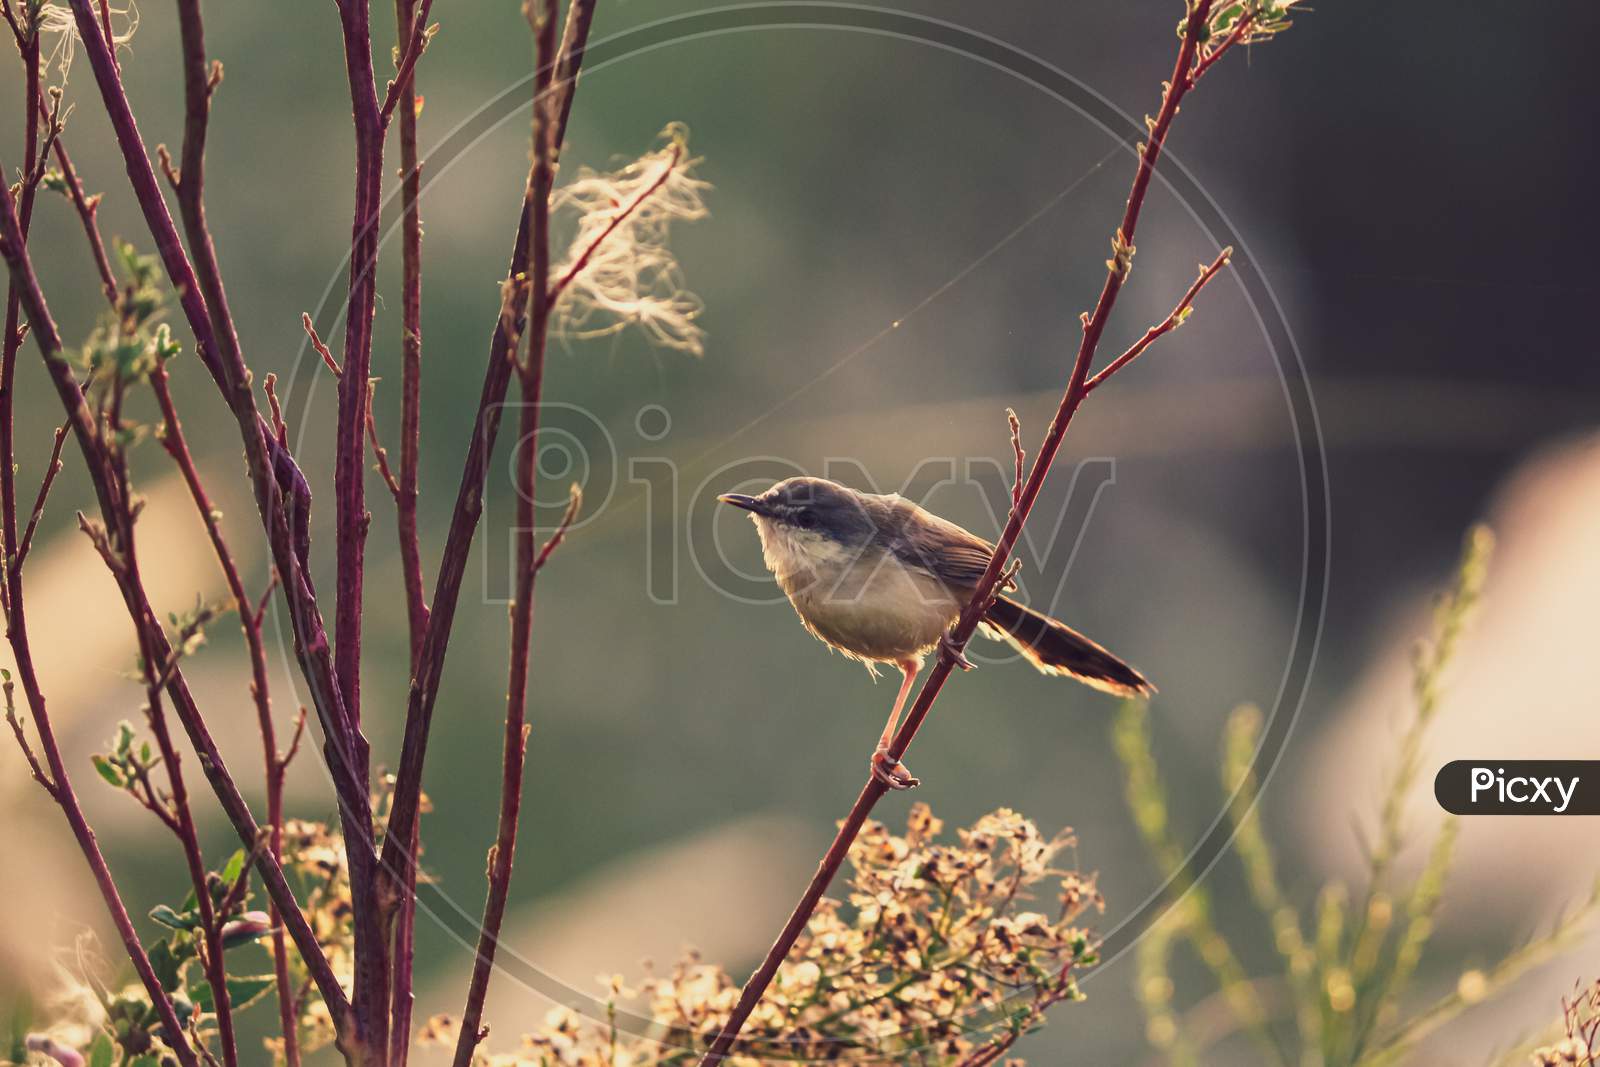 A small brown tiny bird sitting on the branches of the plant